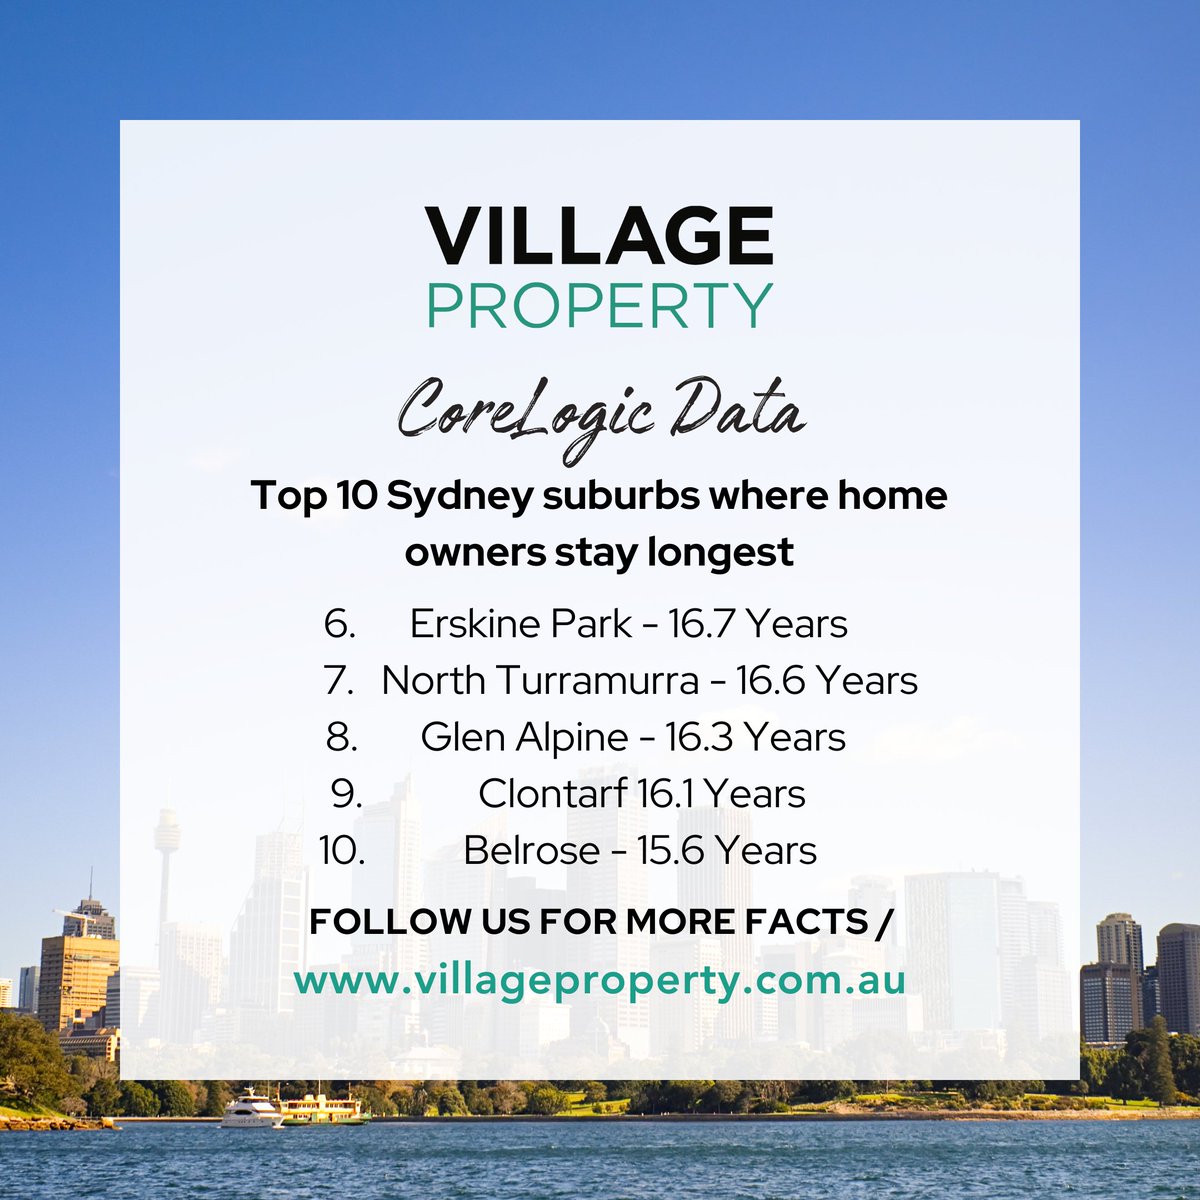 Discover the top 10 Sydney suburbs where homeowners stay the longest. 

ℹ️ Source: CoreLogic Data. The median hold period in years represents properties that sold in the last 12 months.

#FactOftheWeek #VillageProperty